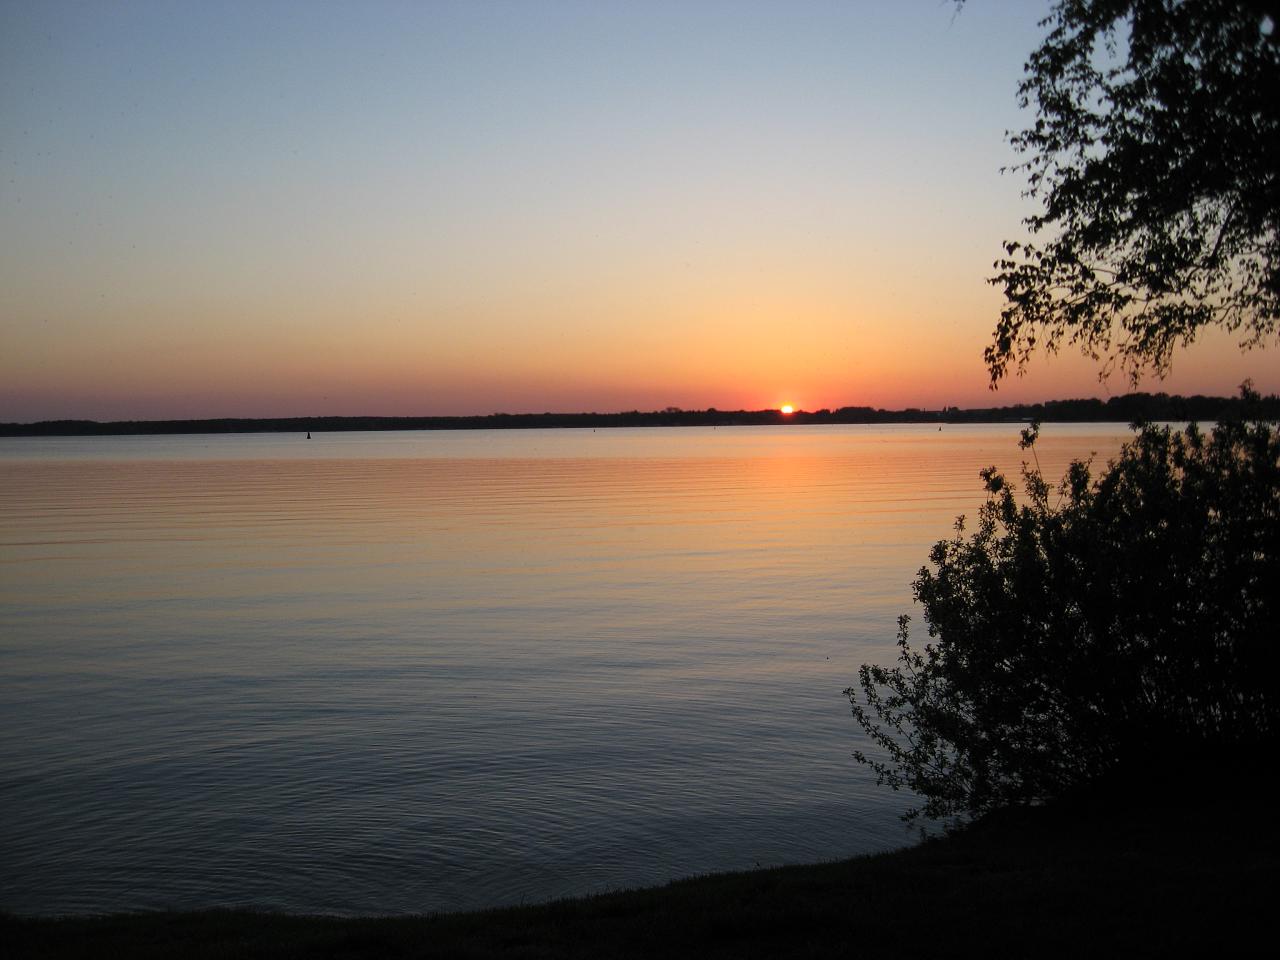 the sun is setting over the water near some trees